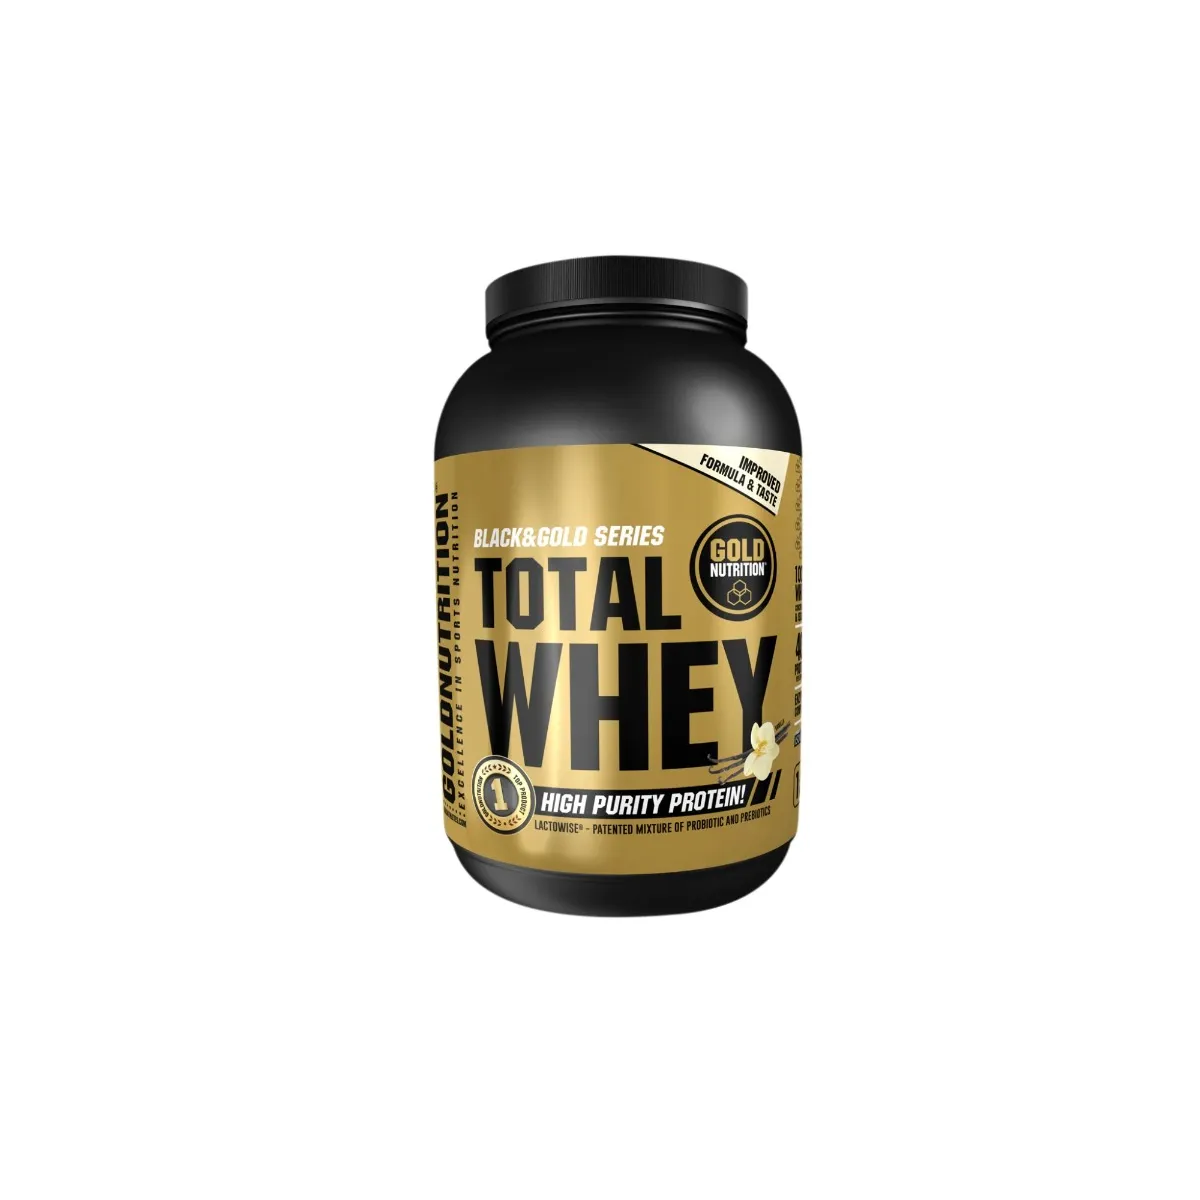 Pudra proteica Total Whey cu vanilie, 1kg, Gold Nutition